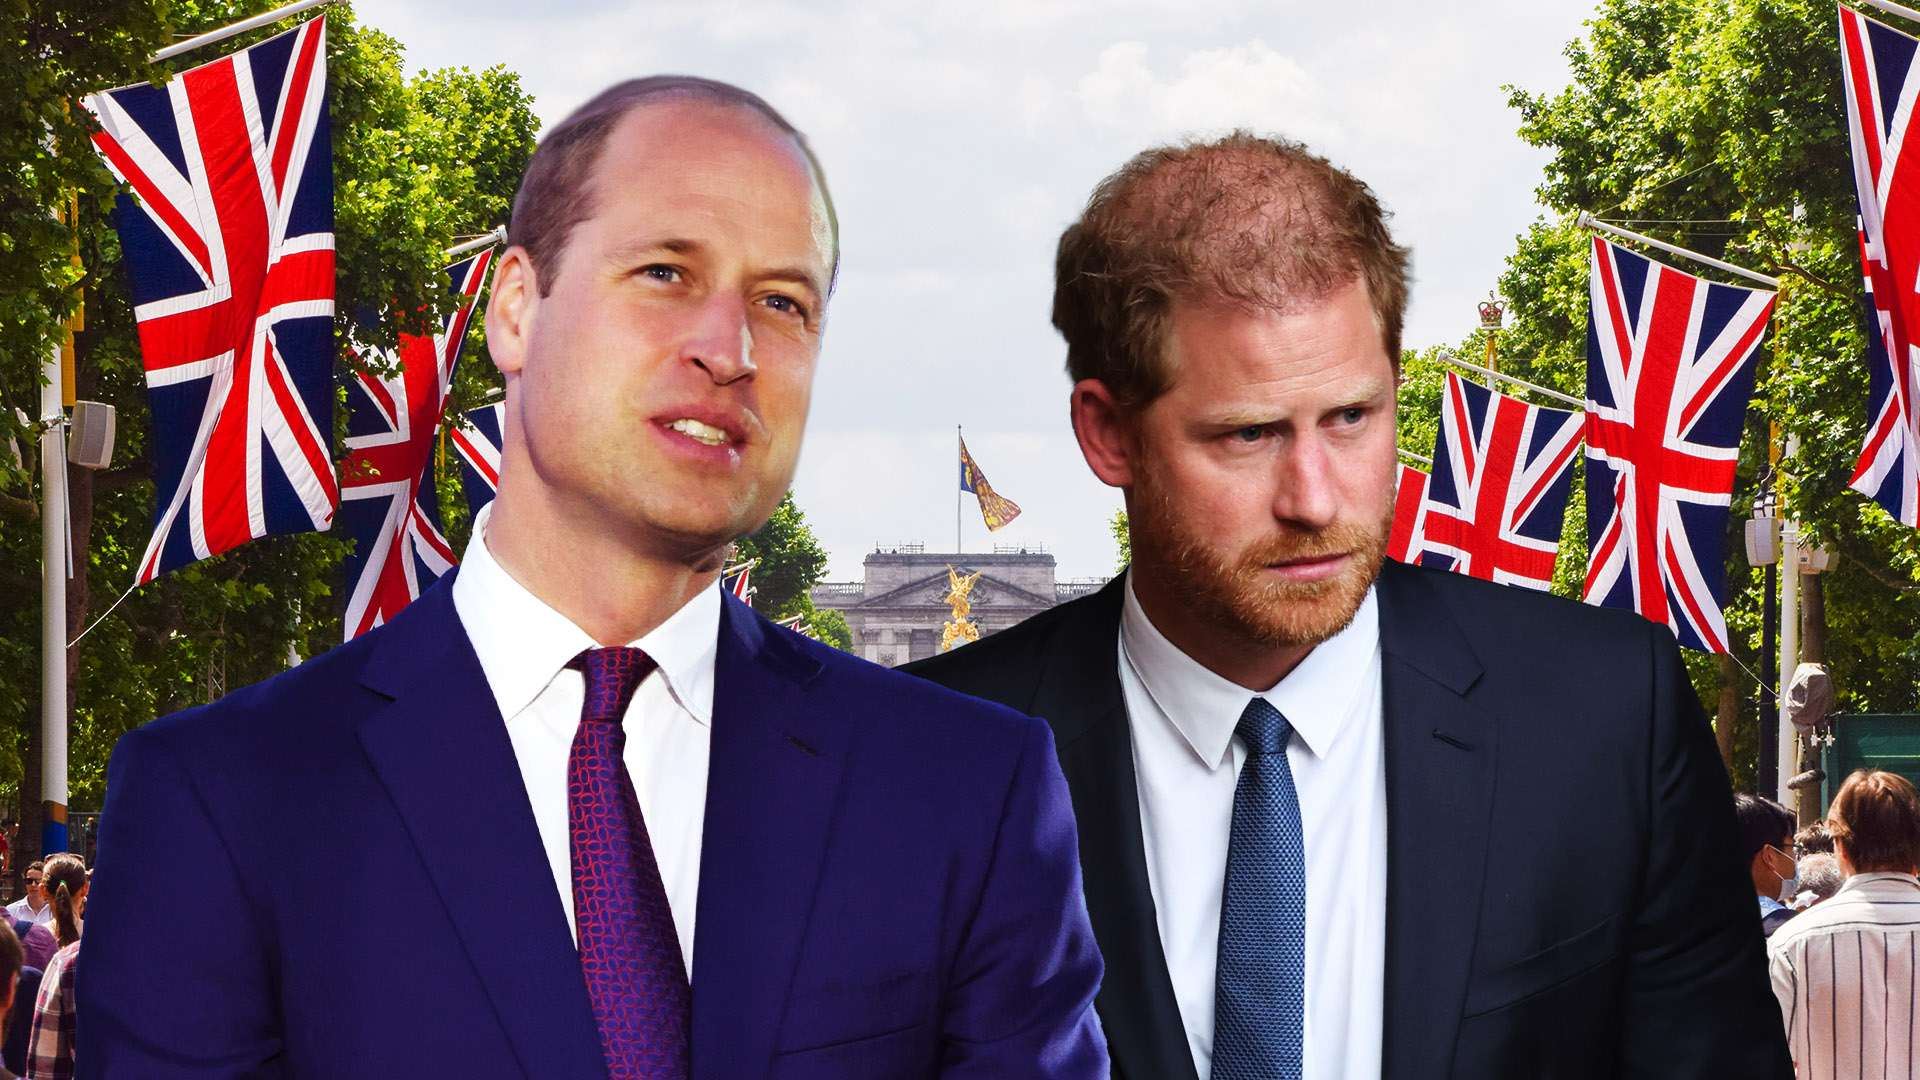 Things Between Prince William & Prince Harry Are As Strained As Before Coronation